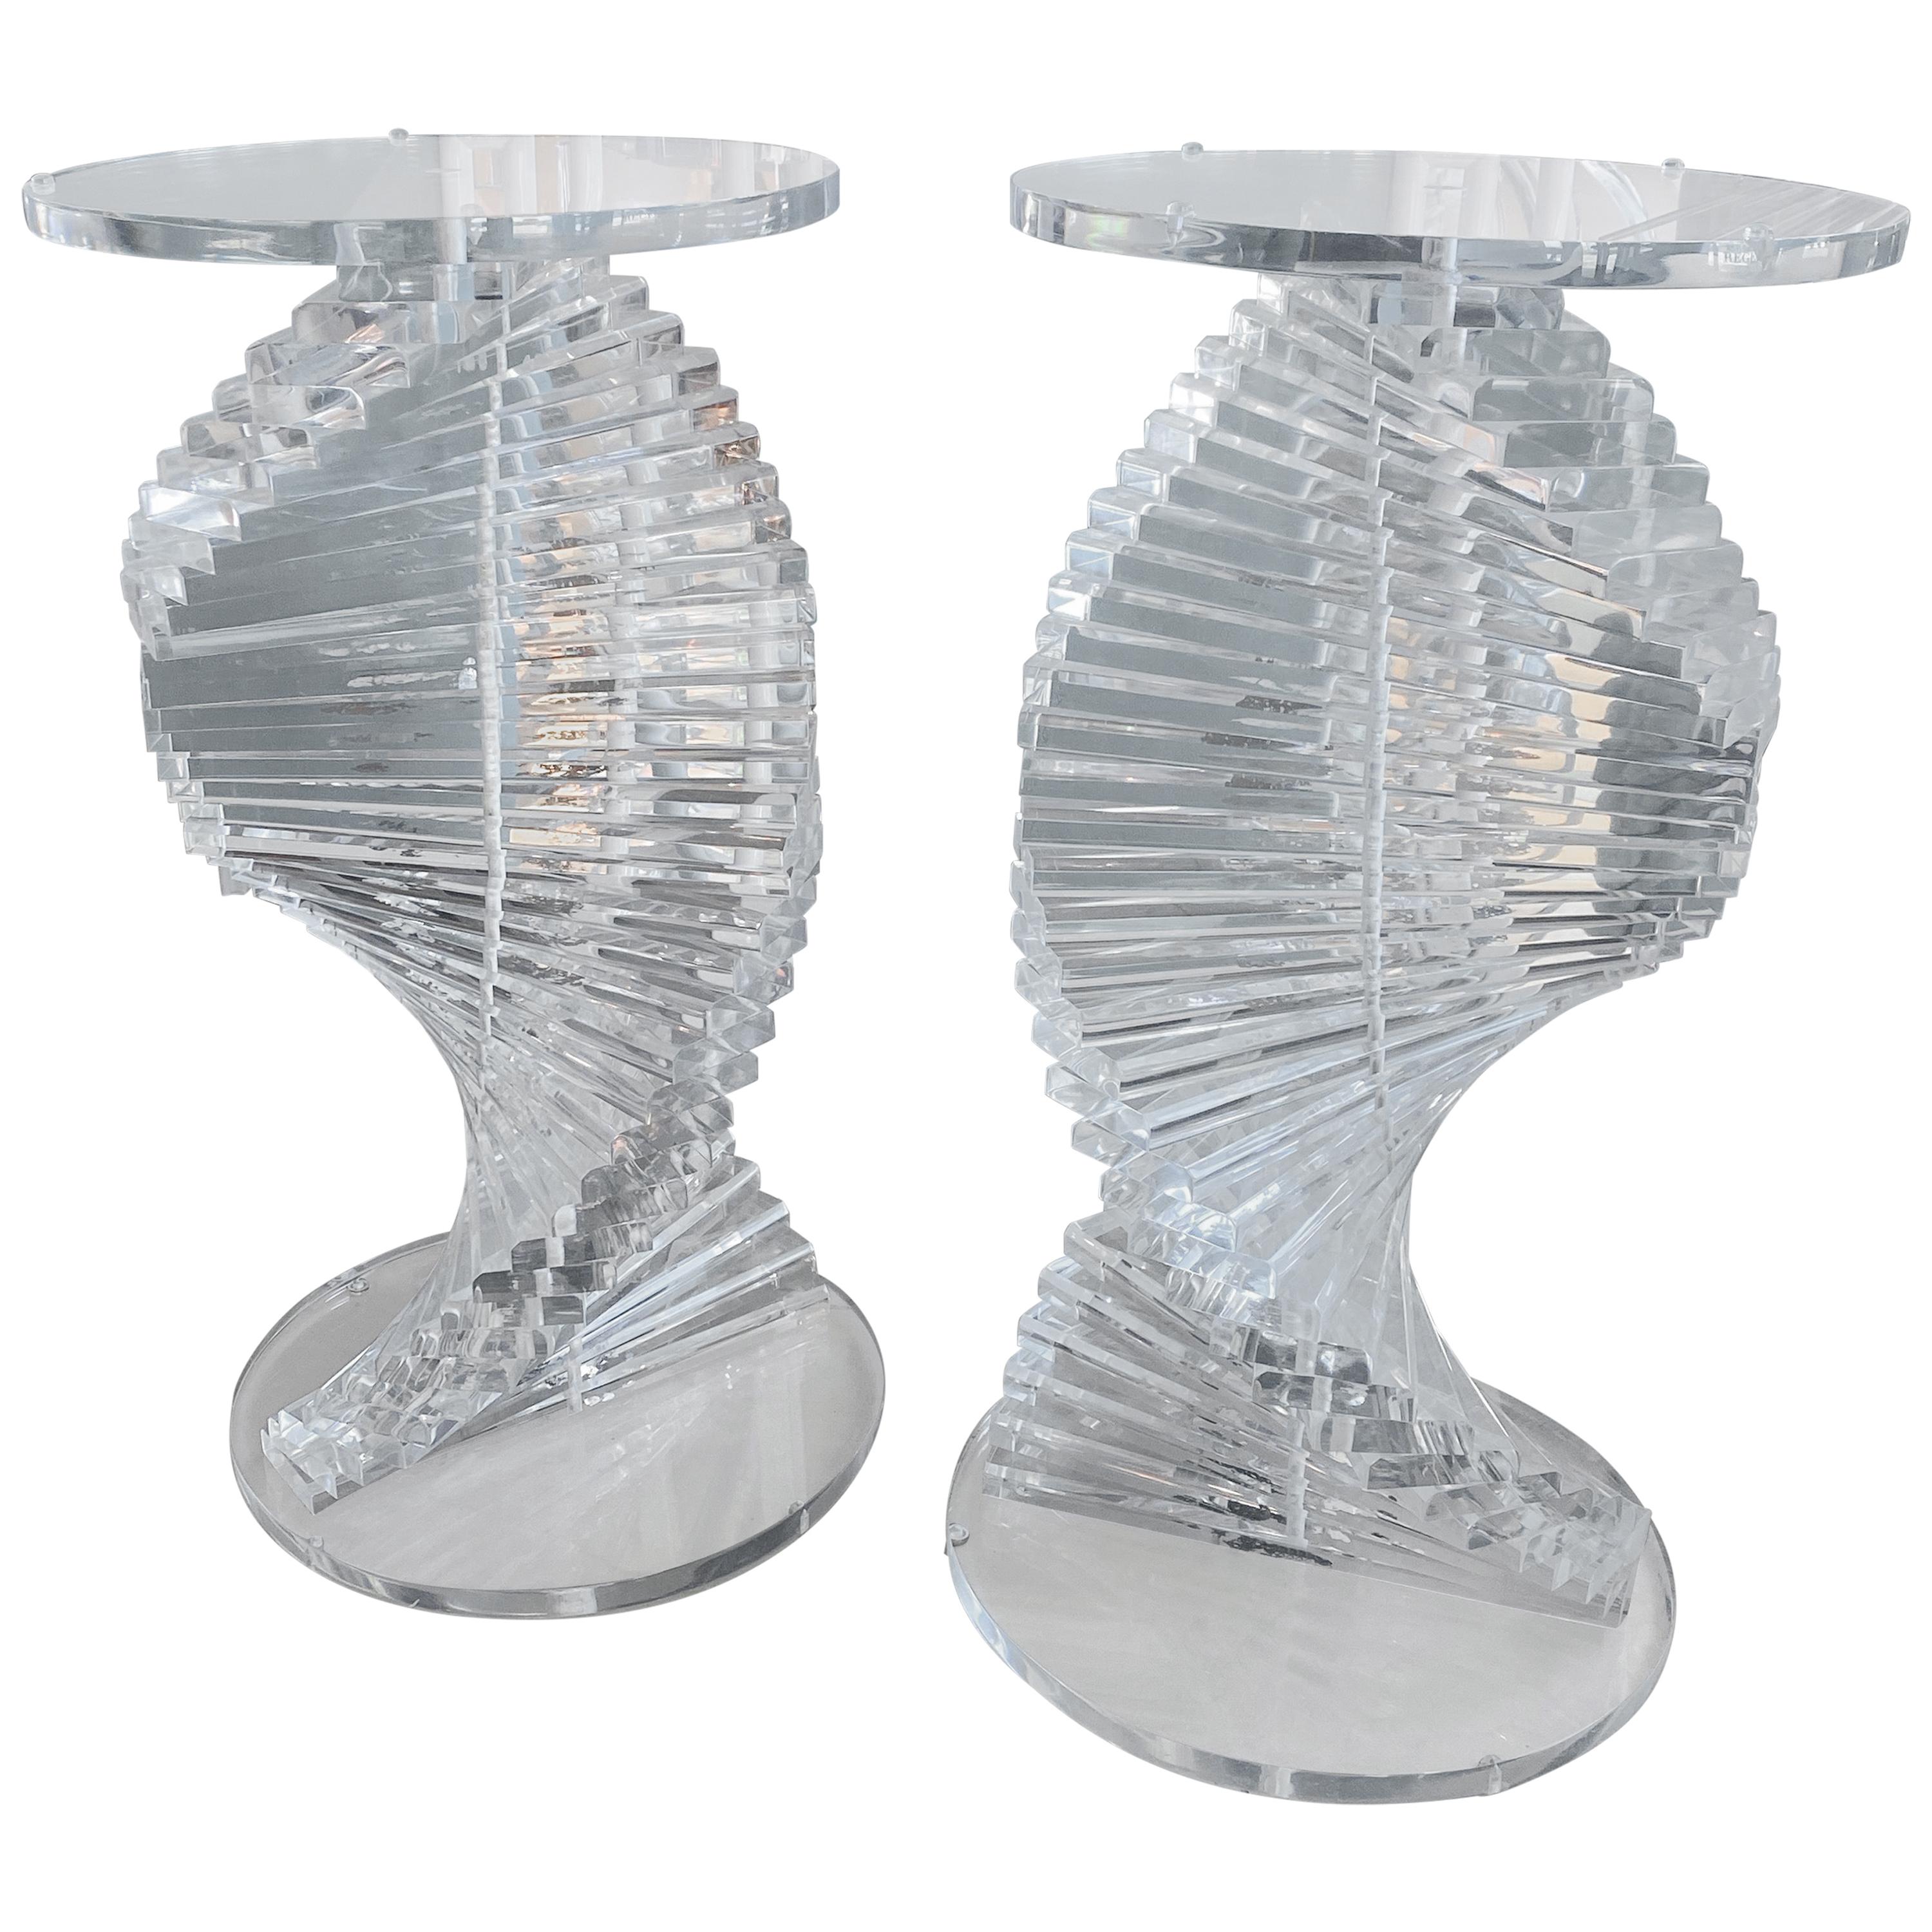 Vintage Pair of Lucite DNA Spiral Helix Dining Table or Desk Bases